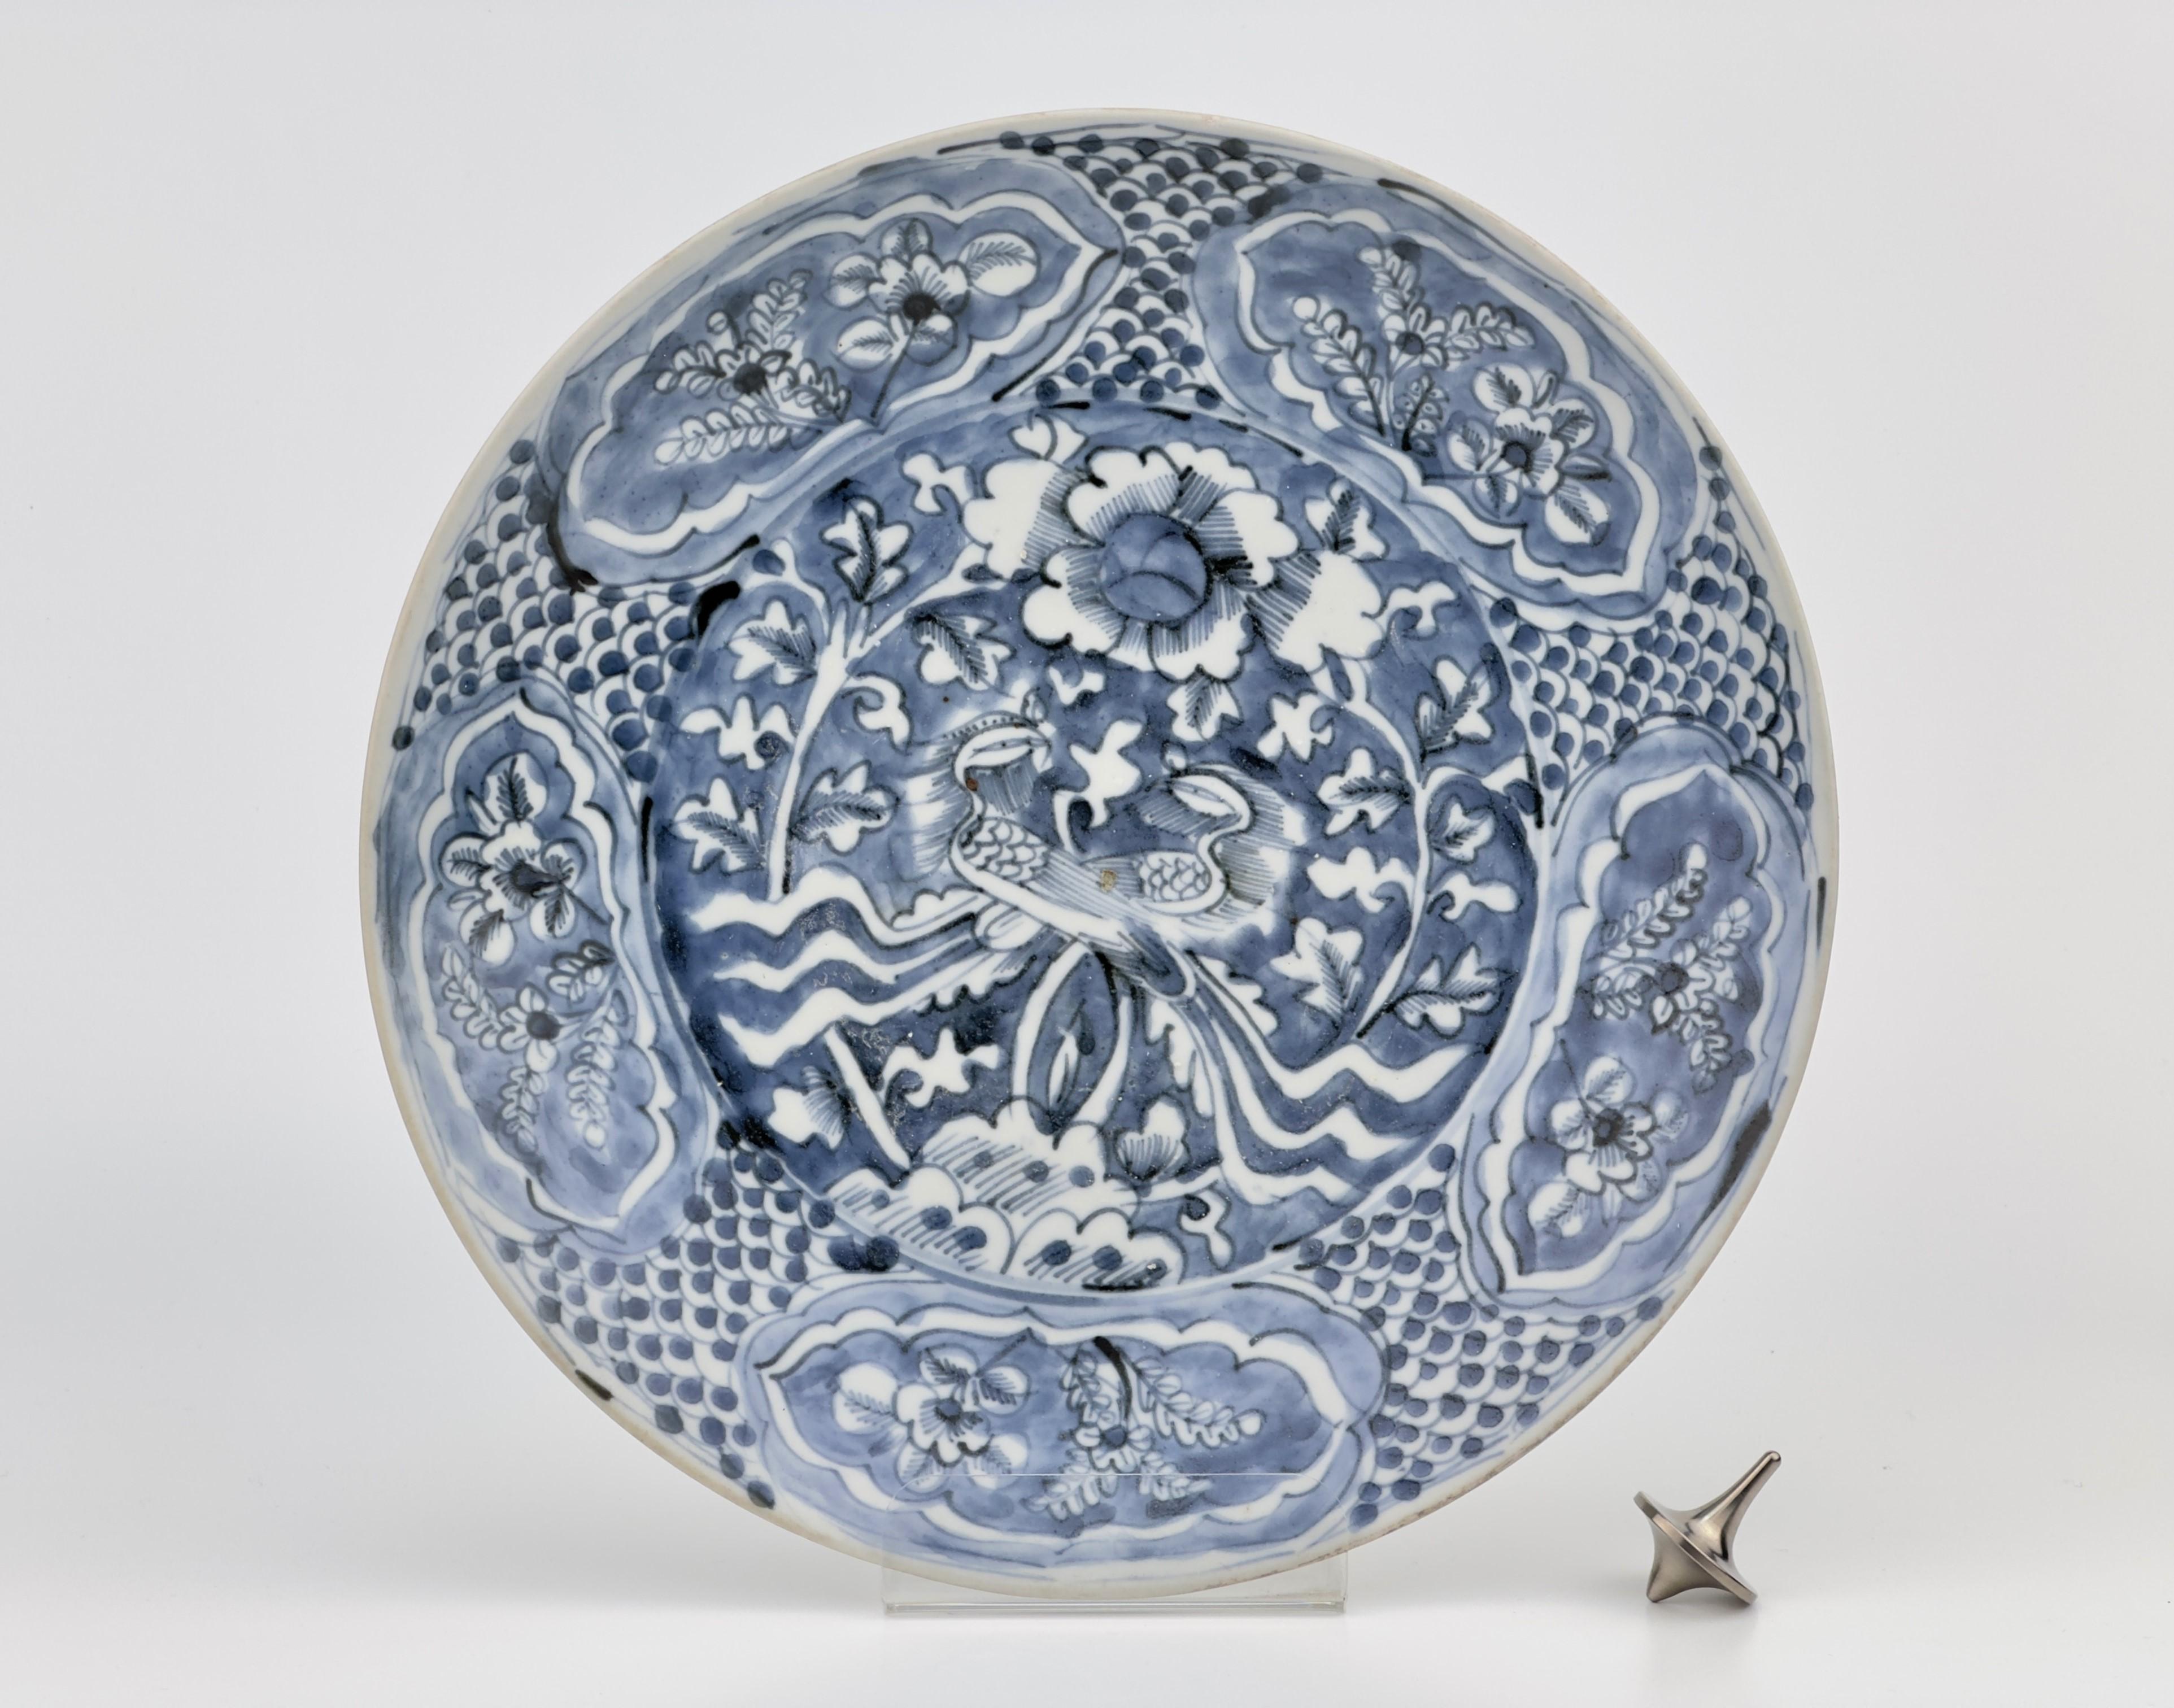 Famous late ming dynasty chinese blue and white porcelain plate, double phoenix, from the shipwrecked binh thuan

Period: Ming Dynasty (1368-1644)
Region: Jingdezhen, China
Type: Blue and White Porcelain
Size : 5.5 cm / 27.0cm
Reference : 
1)